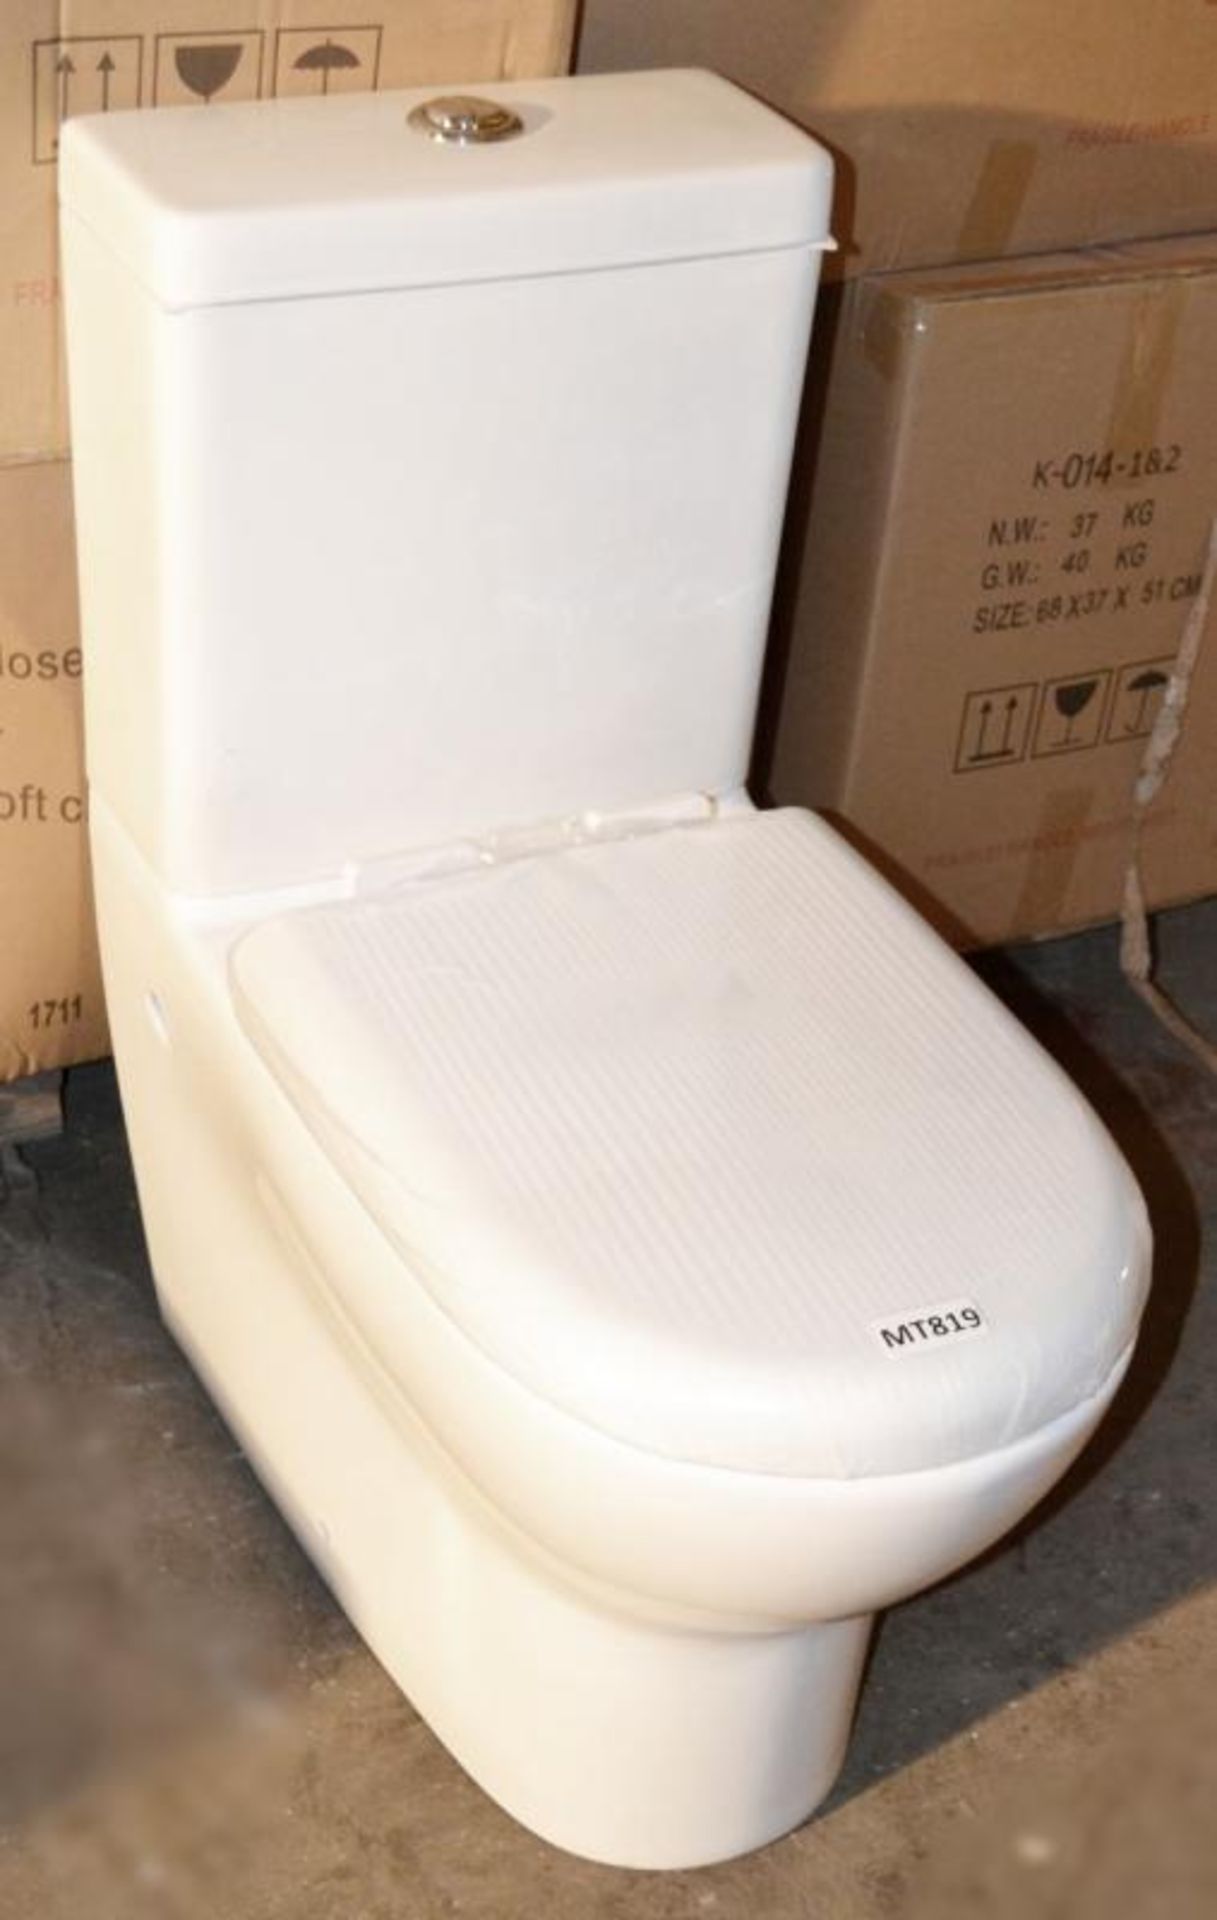 1 x Close Coupled Toilet Pan With Soft Close Toilet Seat And Cistern (Inc. Fittings) - Brand New Box